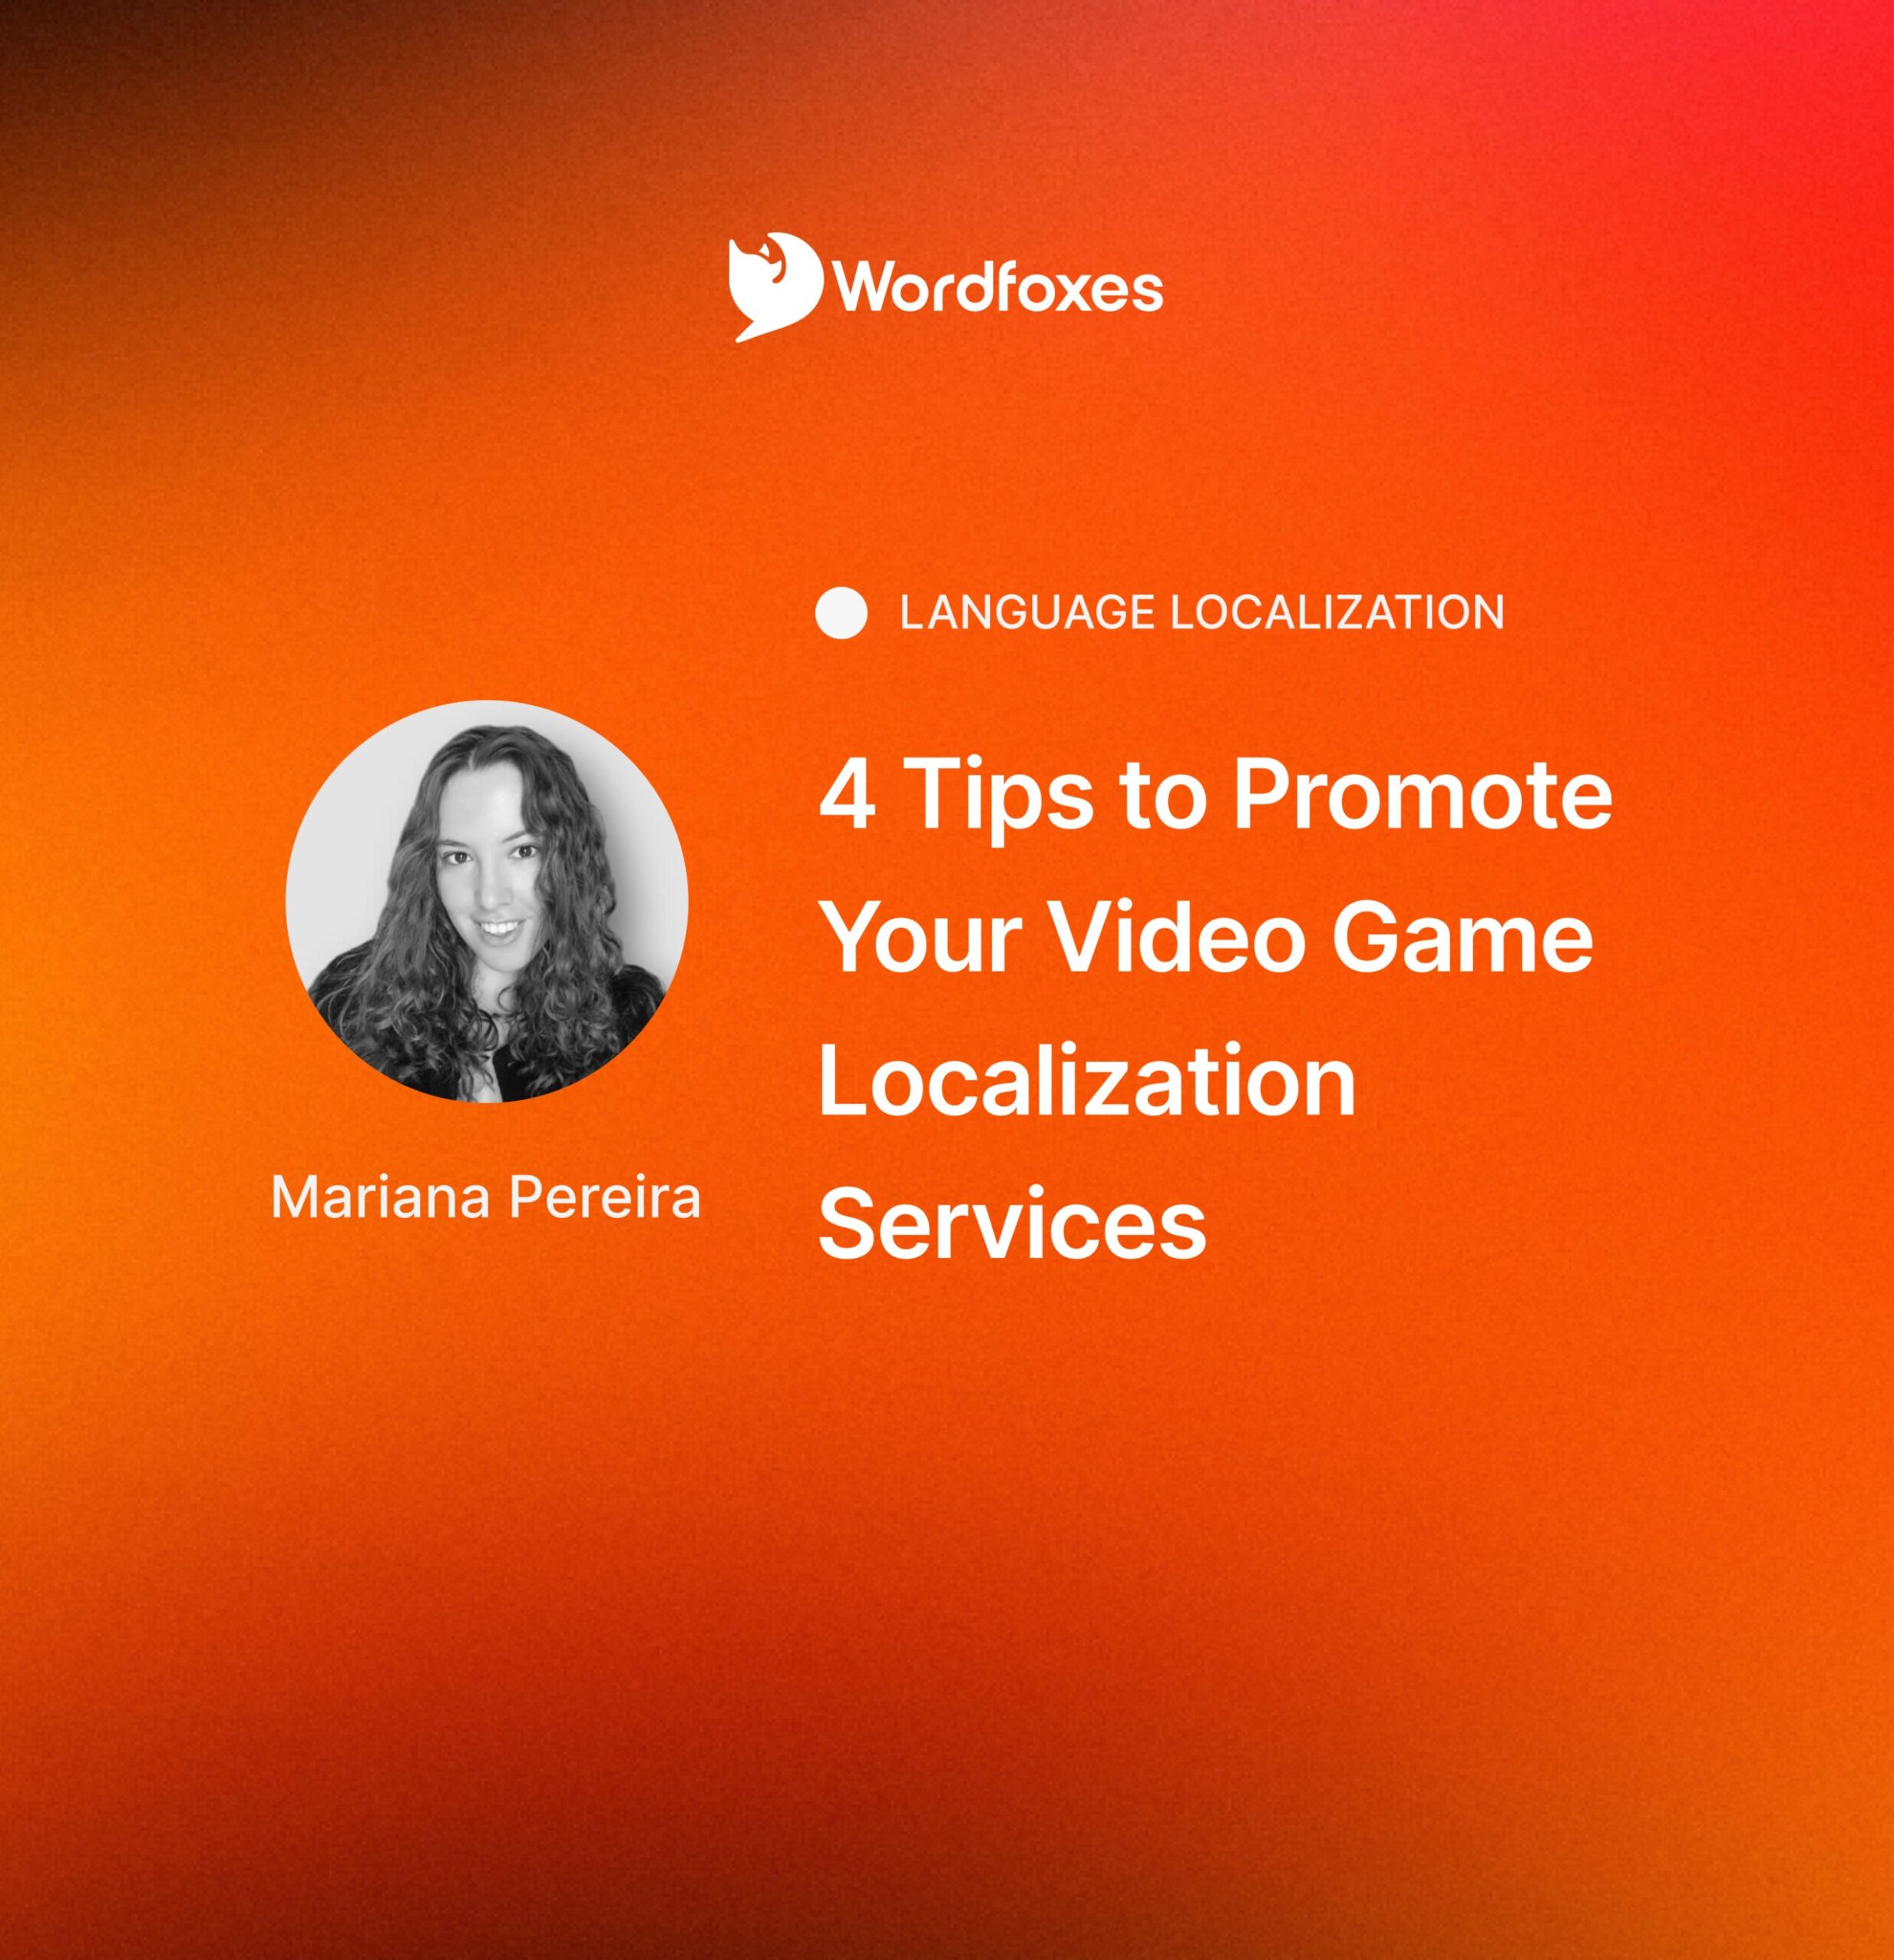 4 Tips to Promote Your Video Game Localization Services